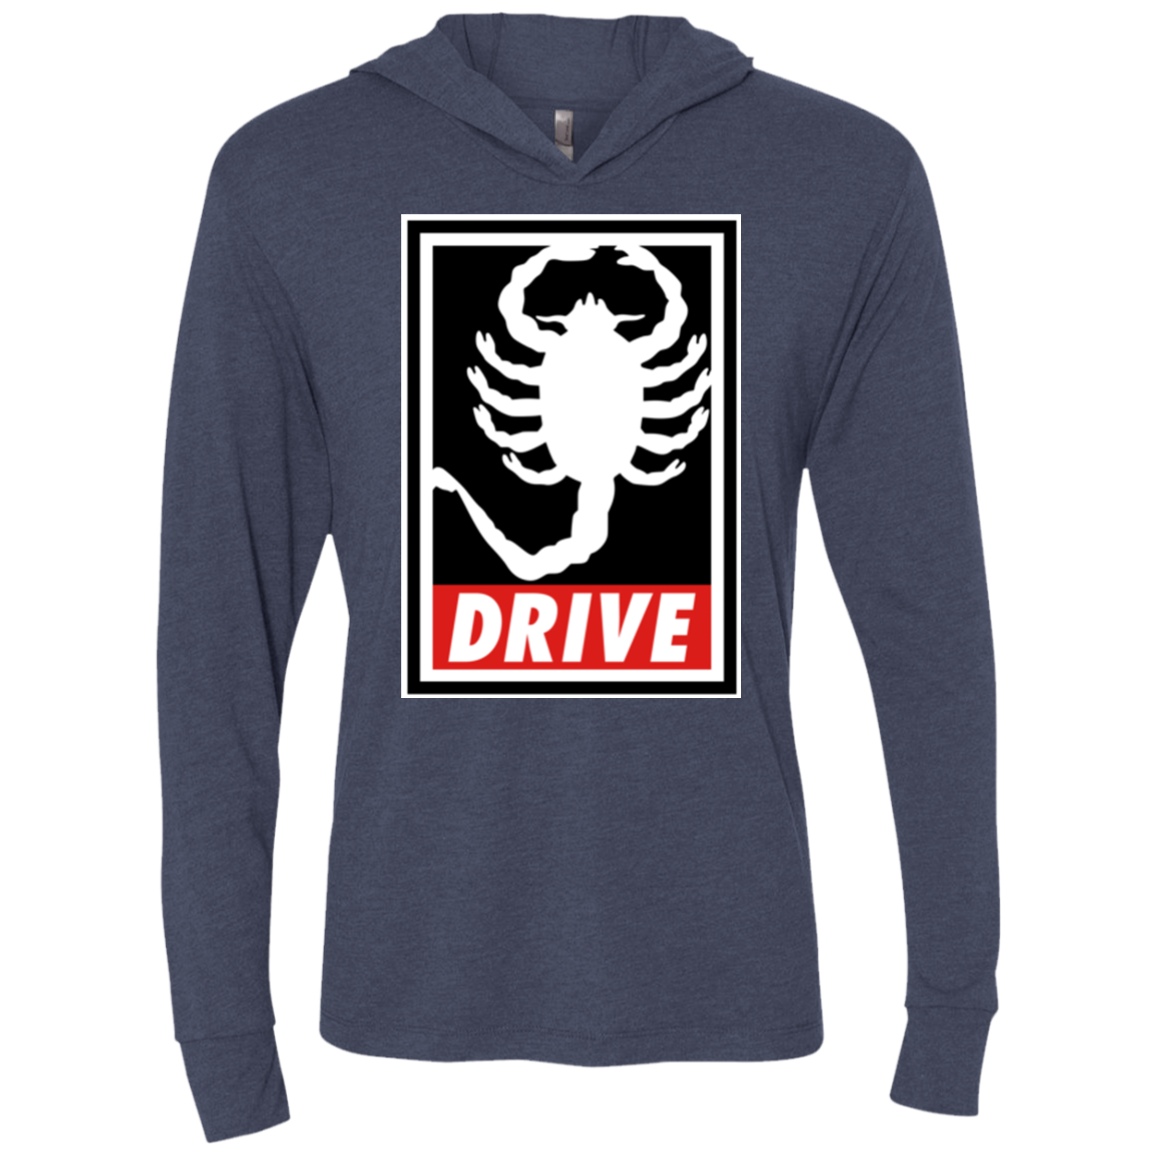 Obey and drive Triblend Long Sleeve Hoodie Tee